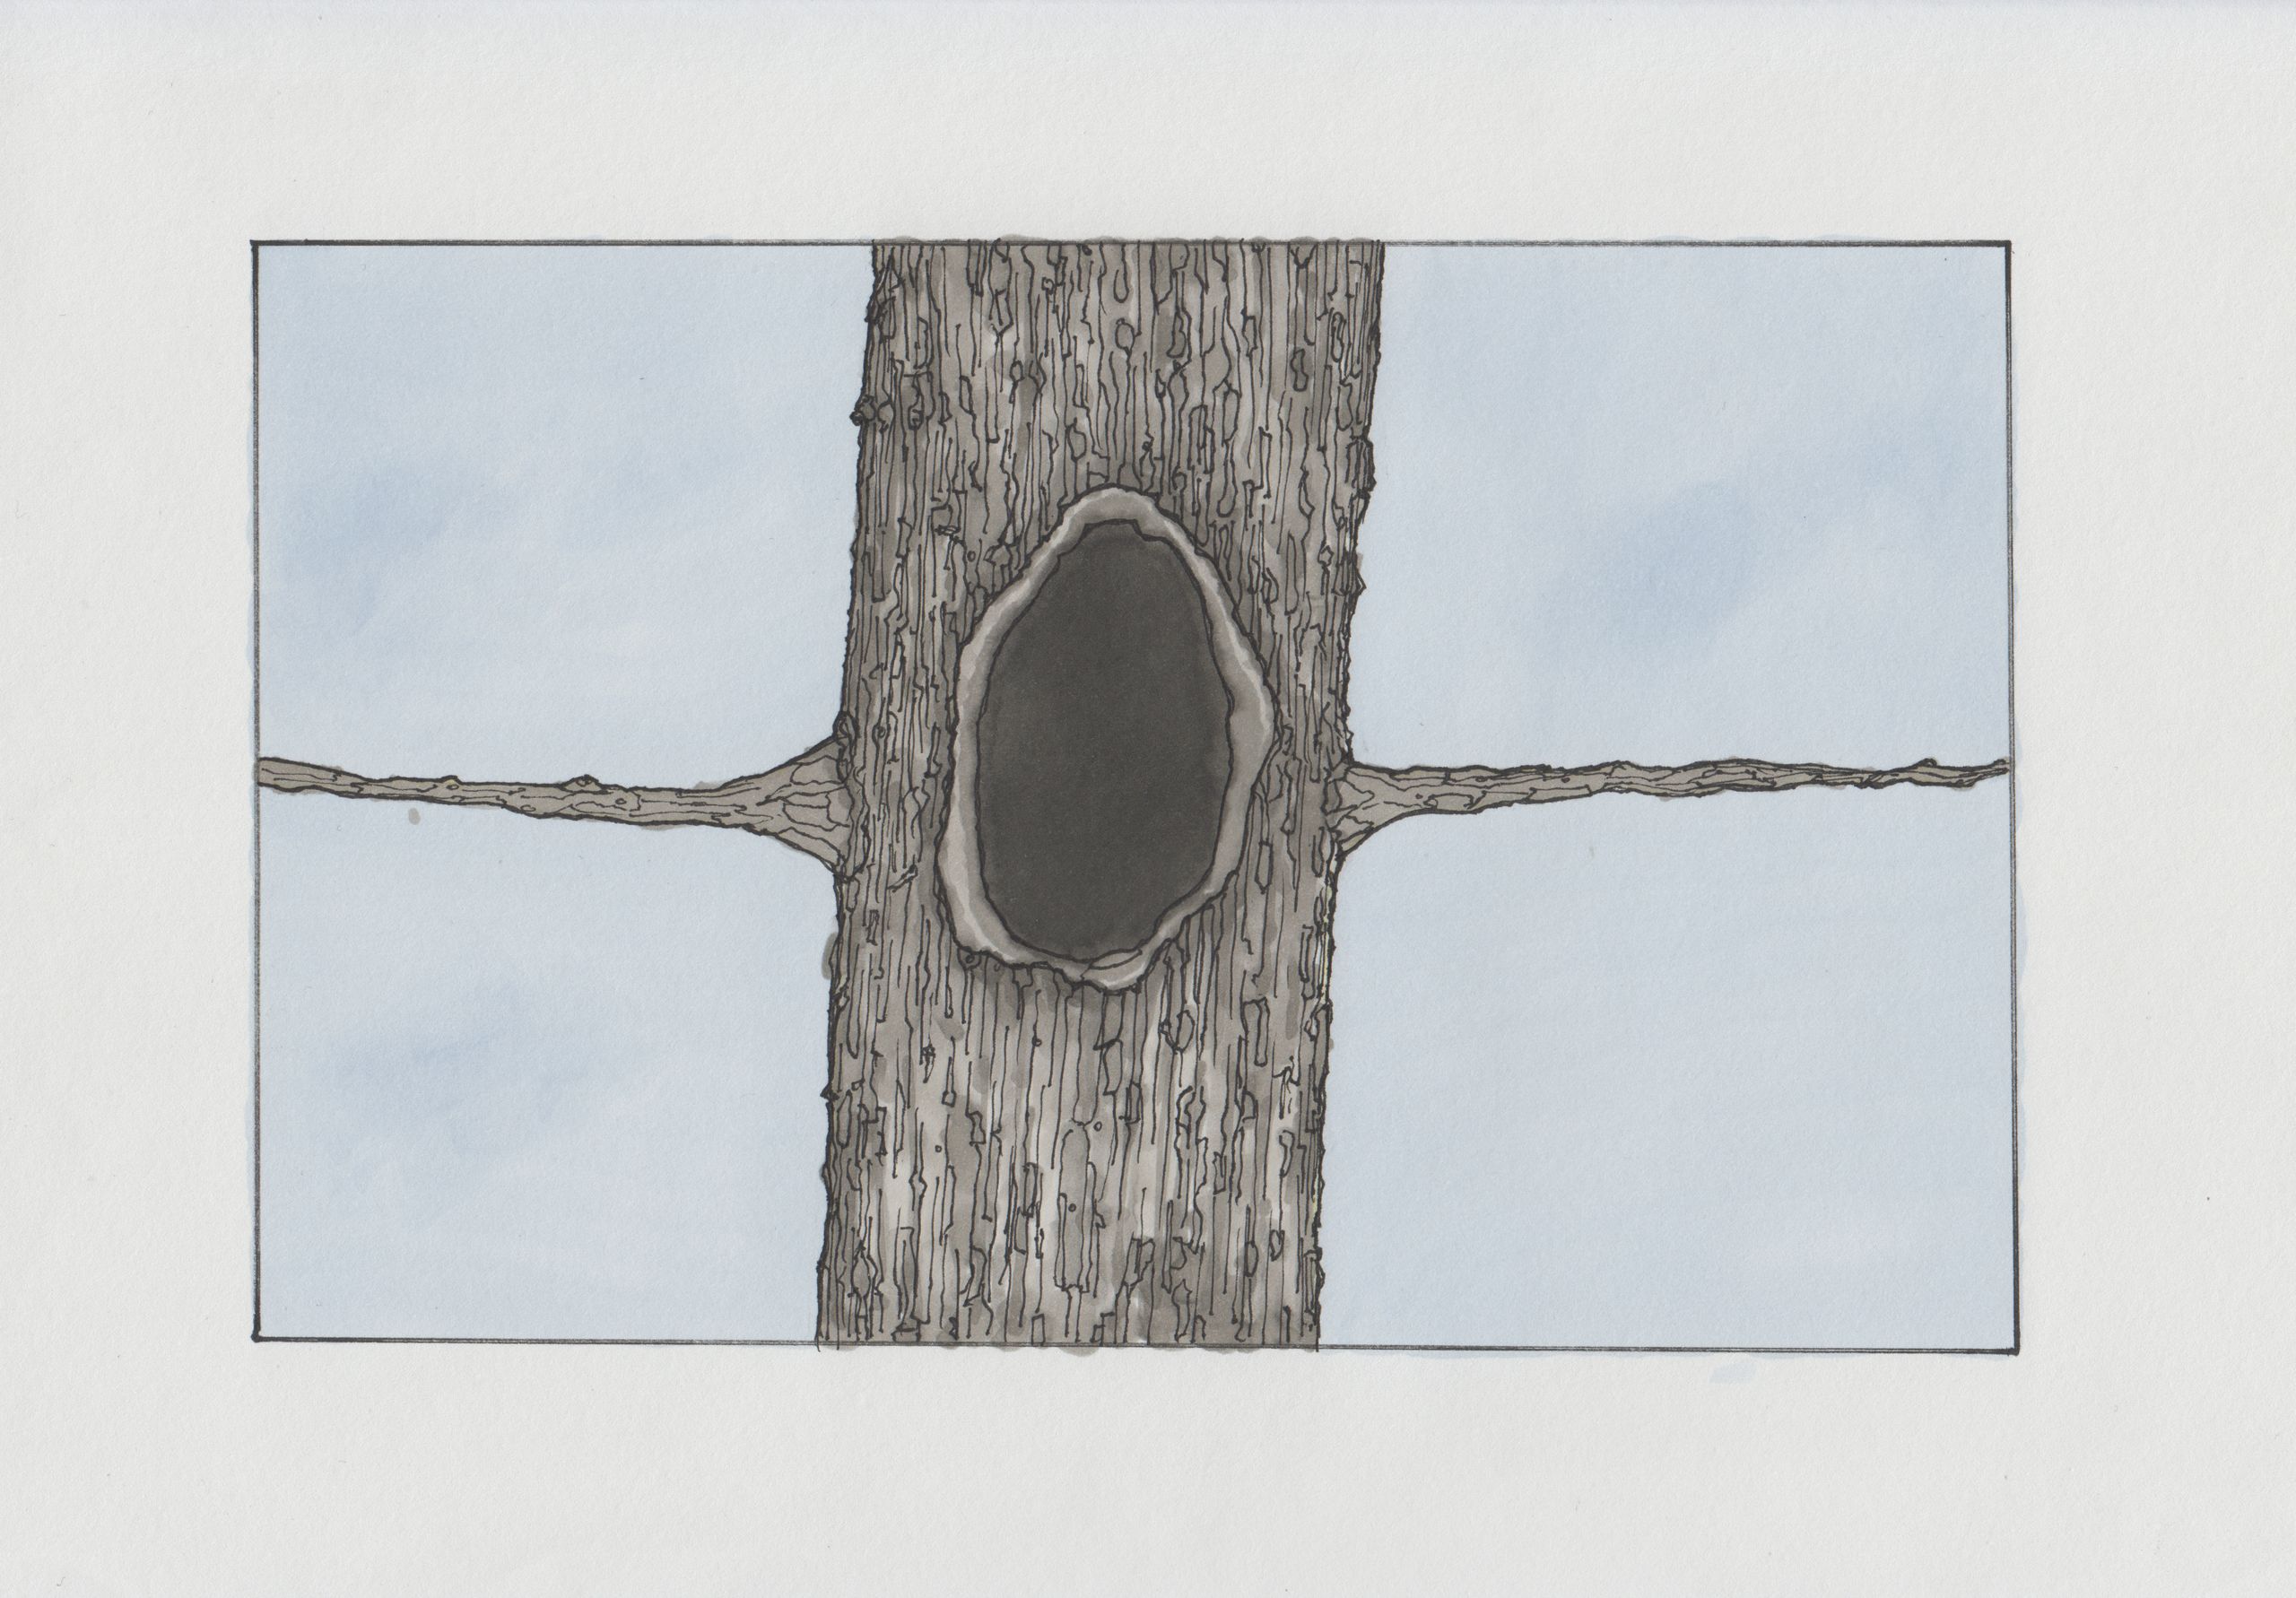 Ink/marker sketch in pale blue and warm grey tones of a tree that seems to hug the viewer, in a very weird way